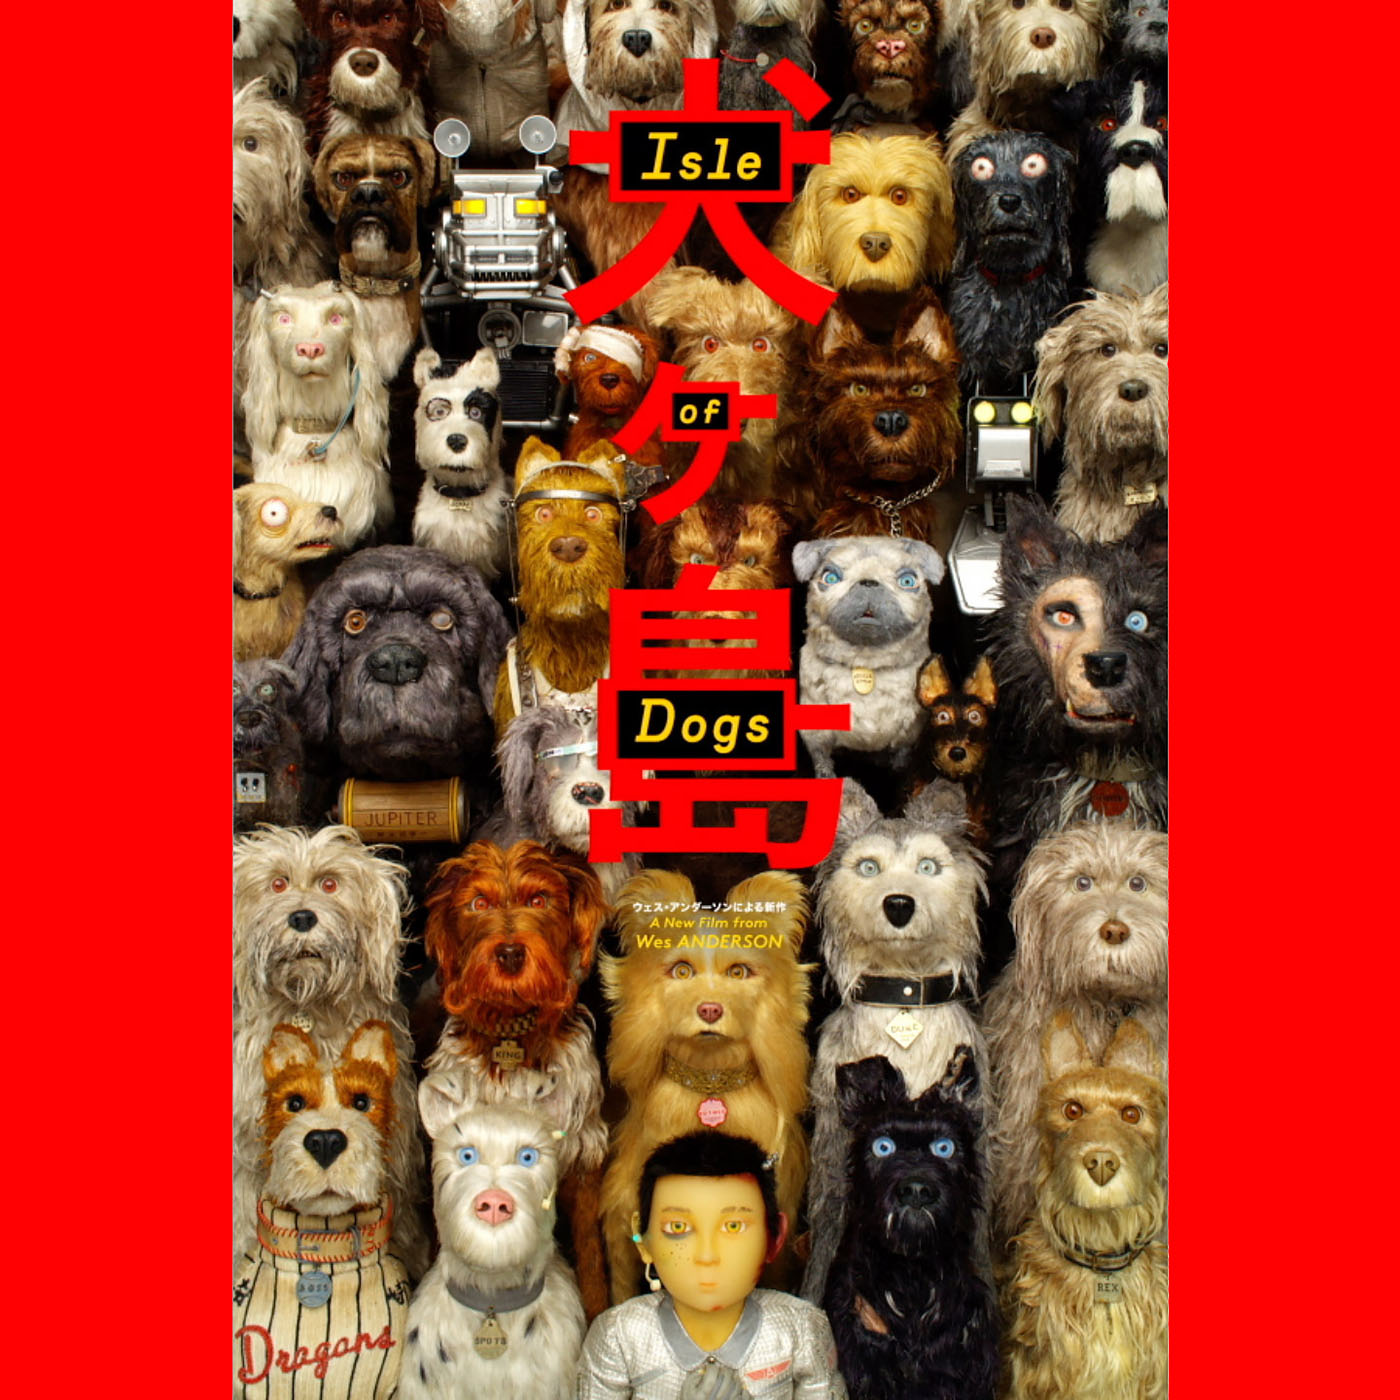 Episode #14: Isle of Dogs